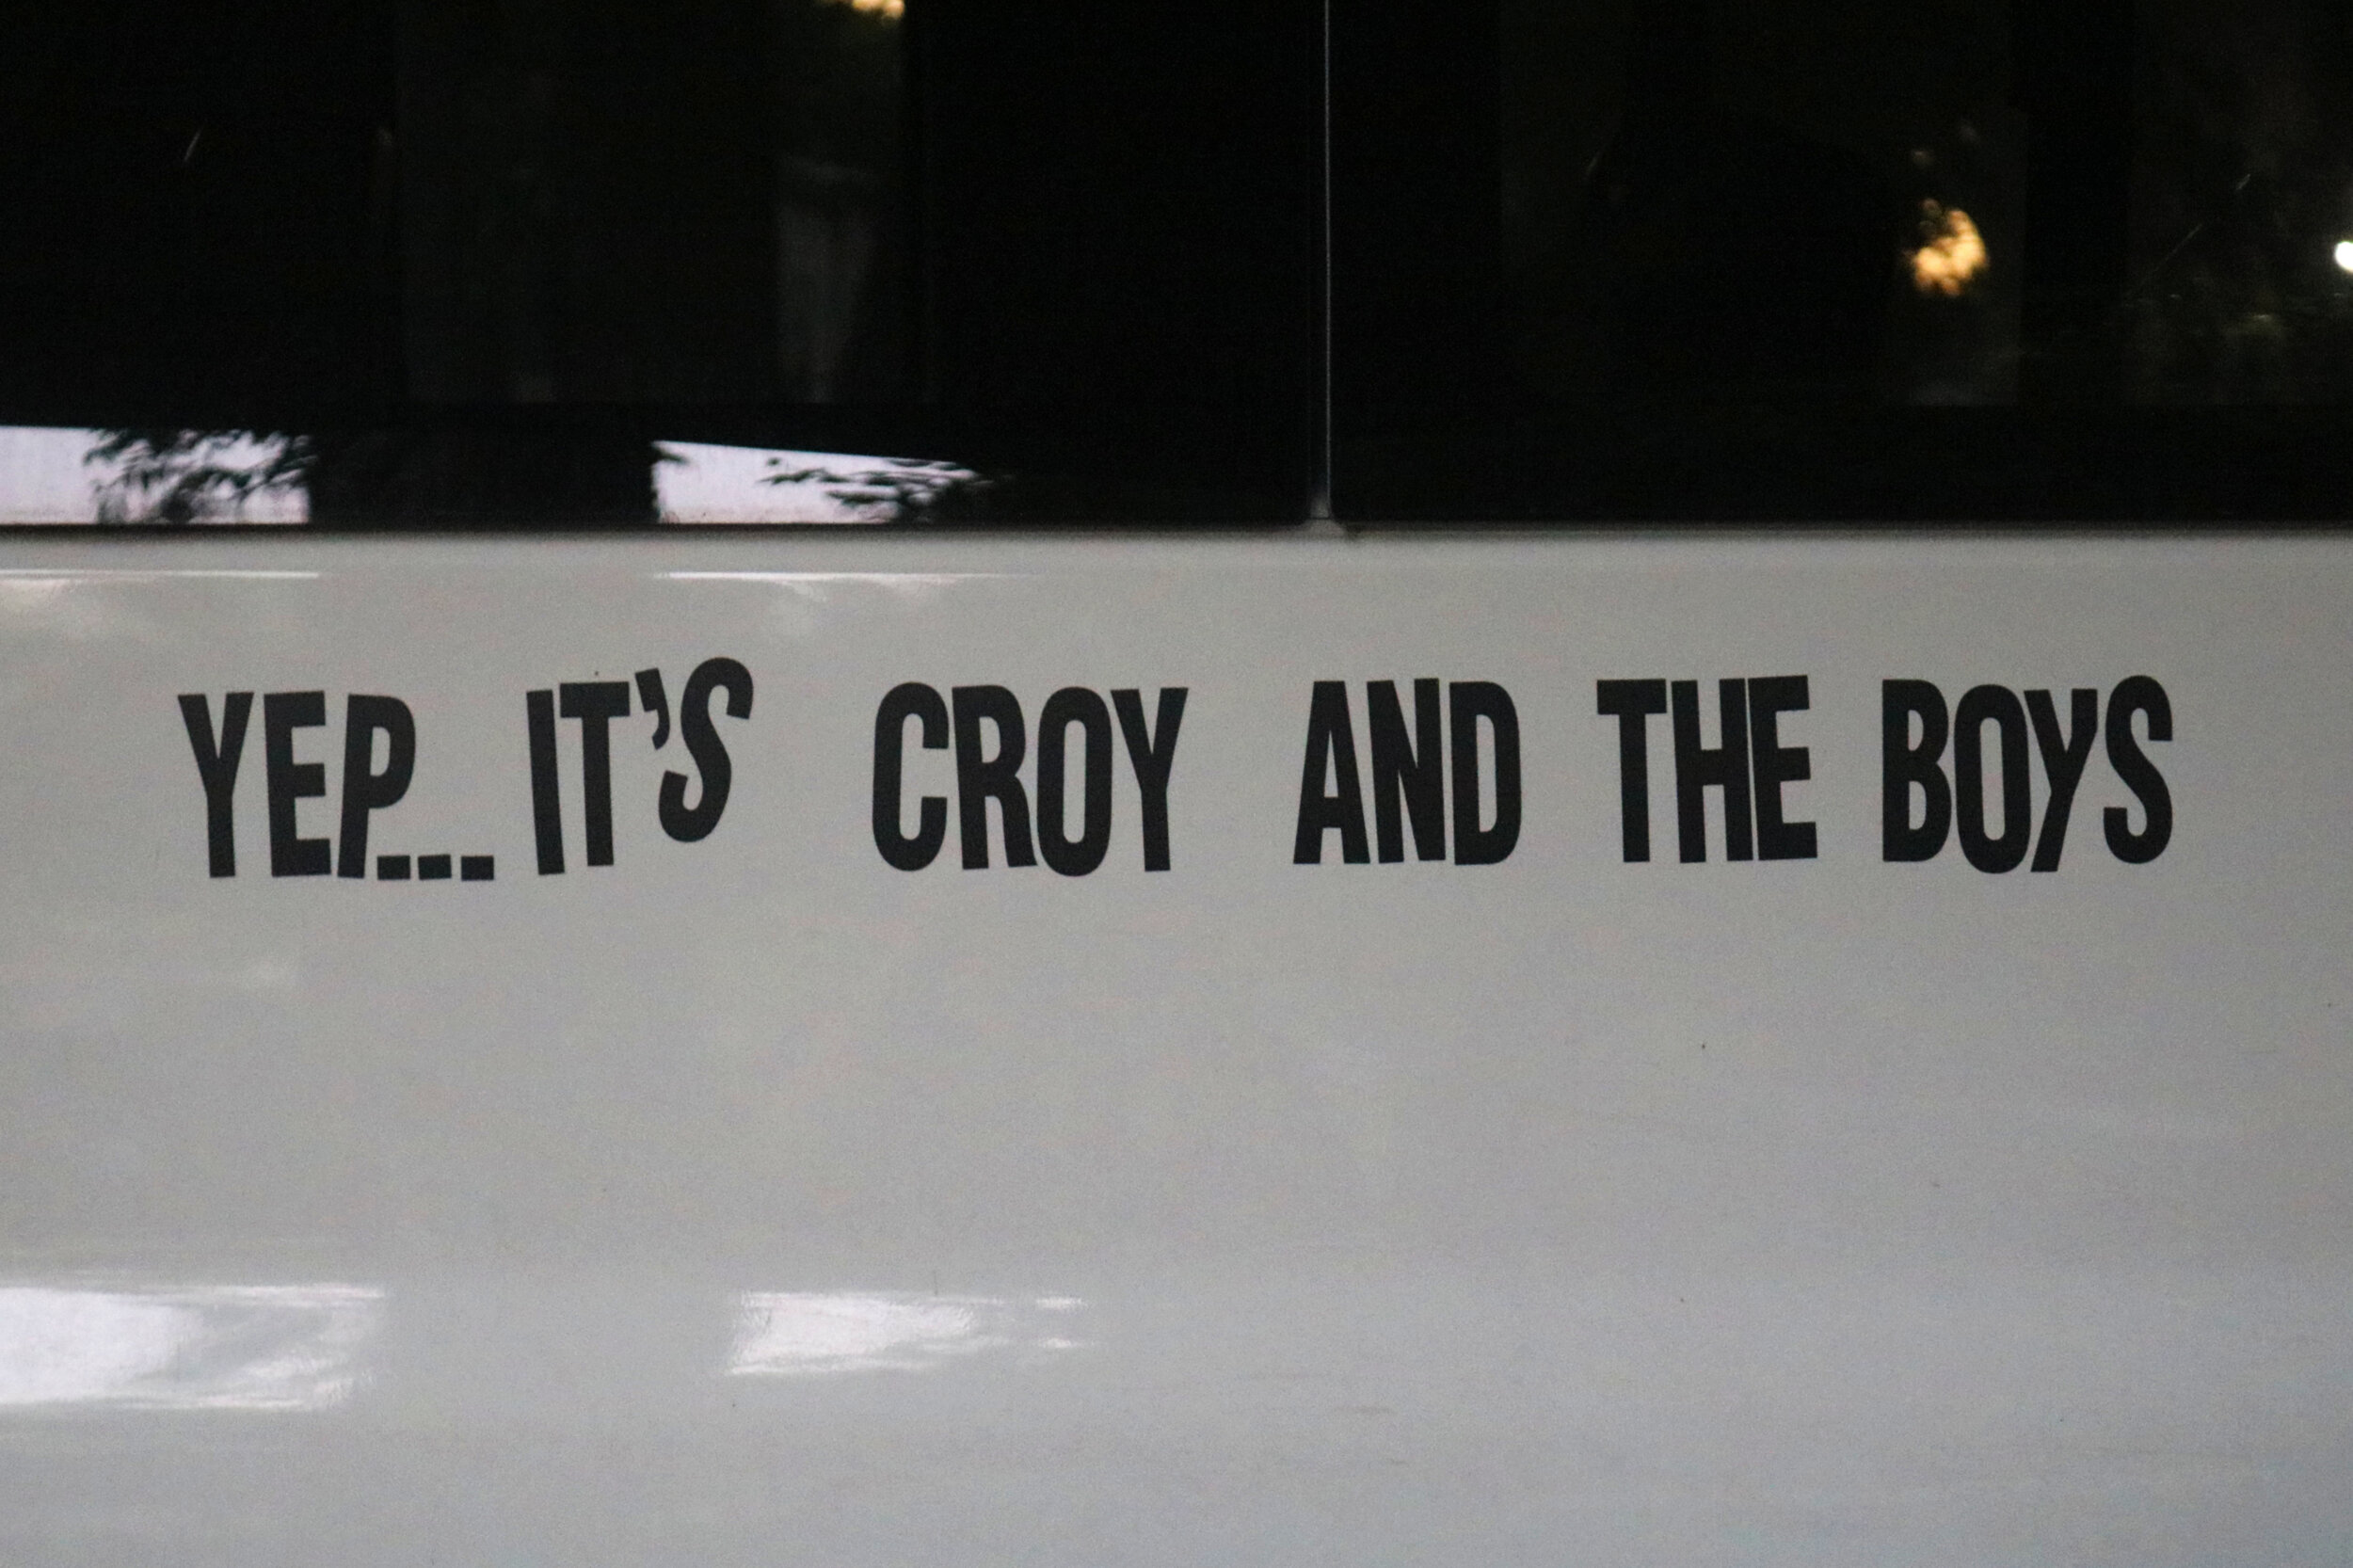  The van of Croy and the Boys. 